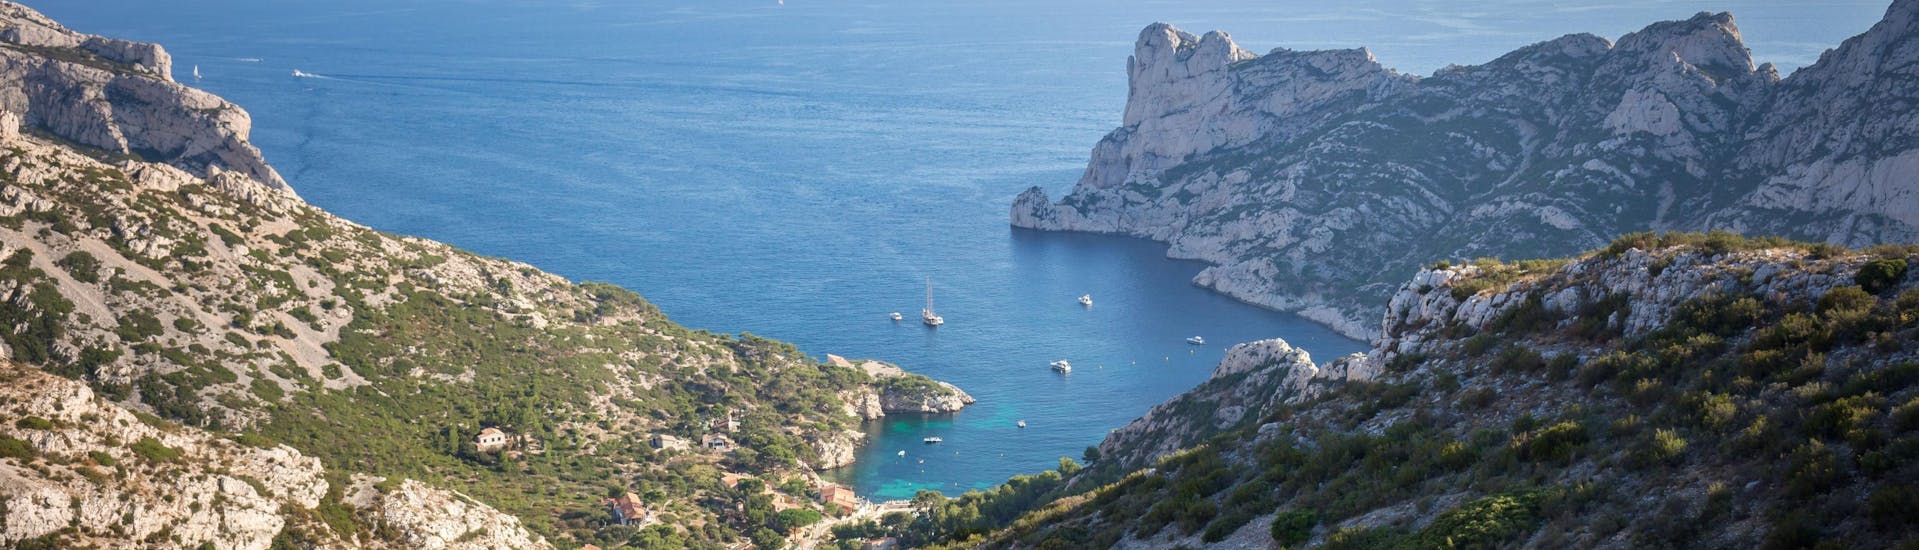 View on calanque of Sormiou with boats sailing in the beautiful turquoise Mediterranean sea. Marseille, Cassis.